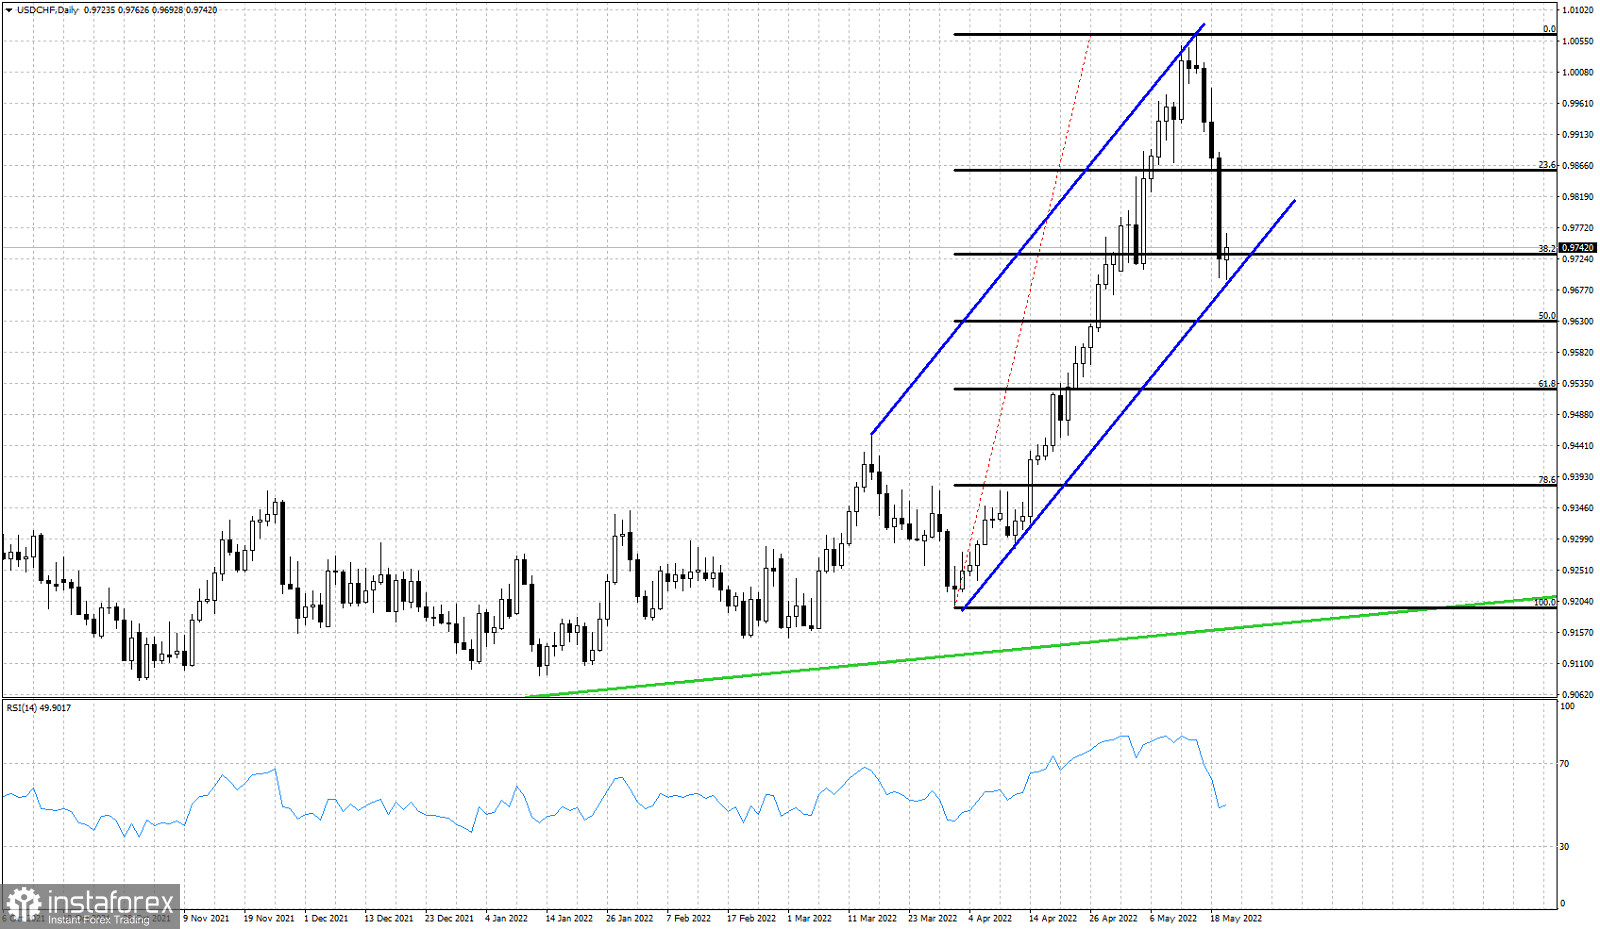 USDCHF analysis for the week starting May 23rd.